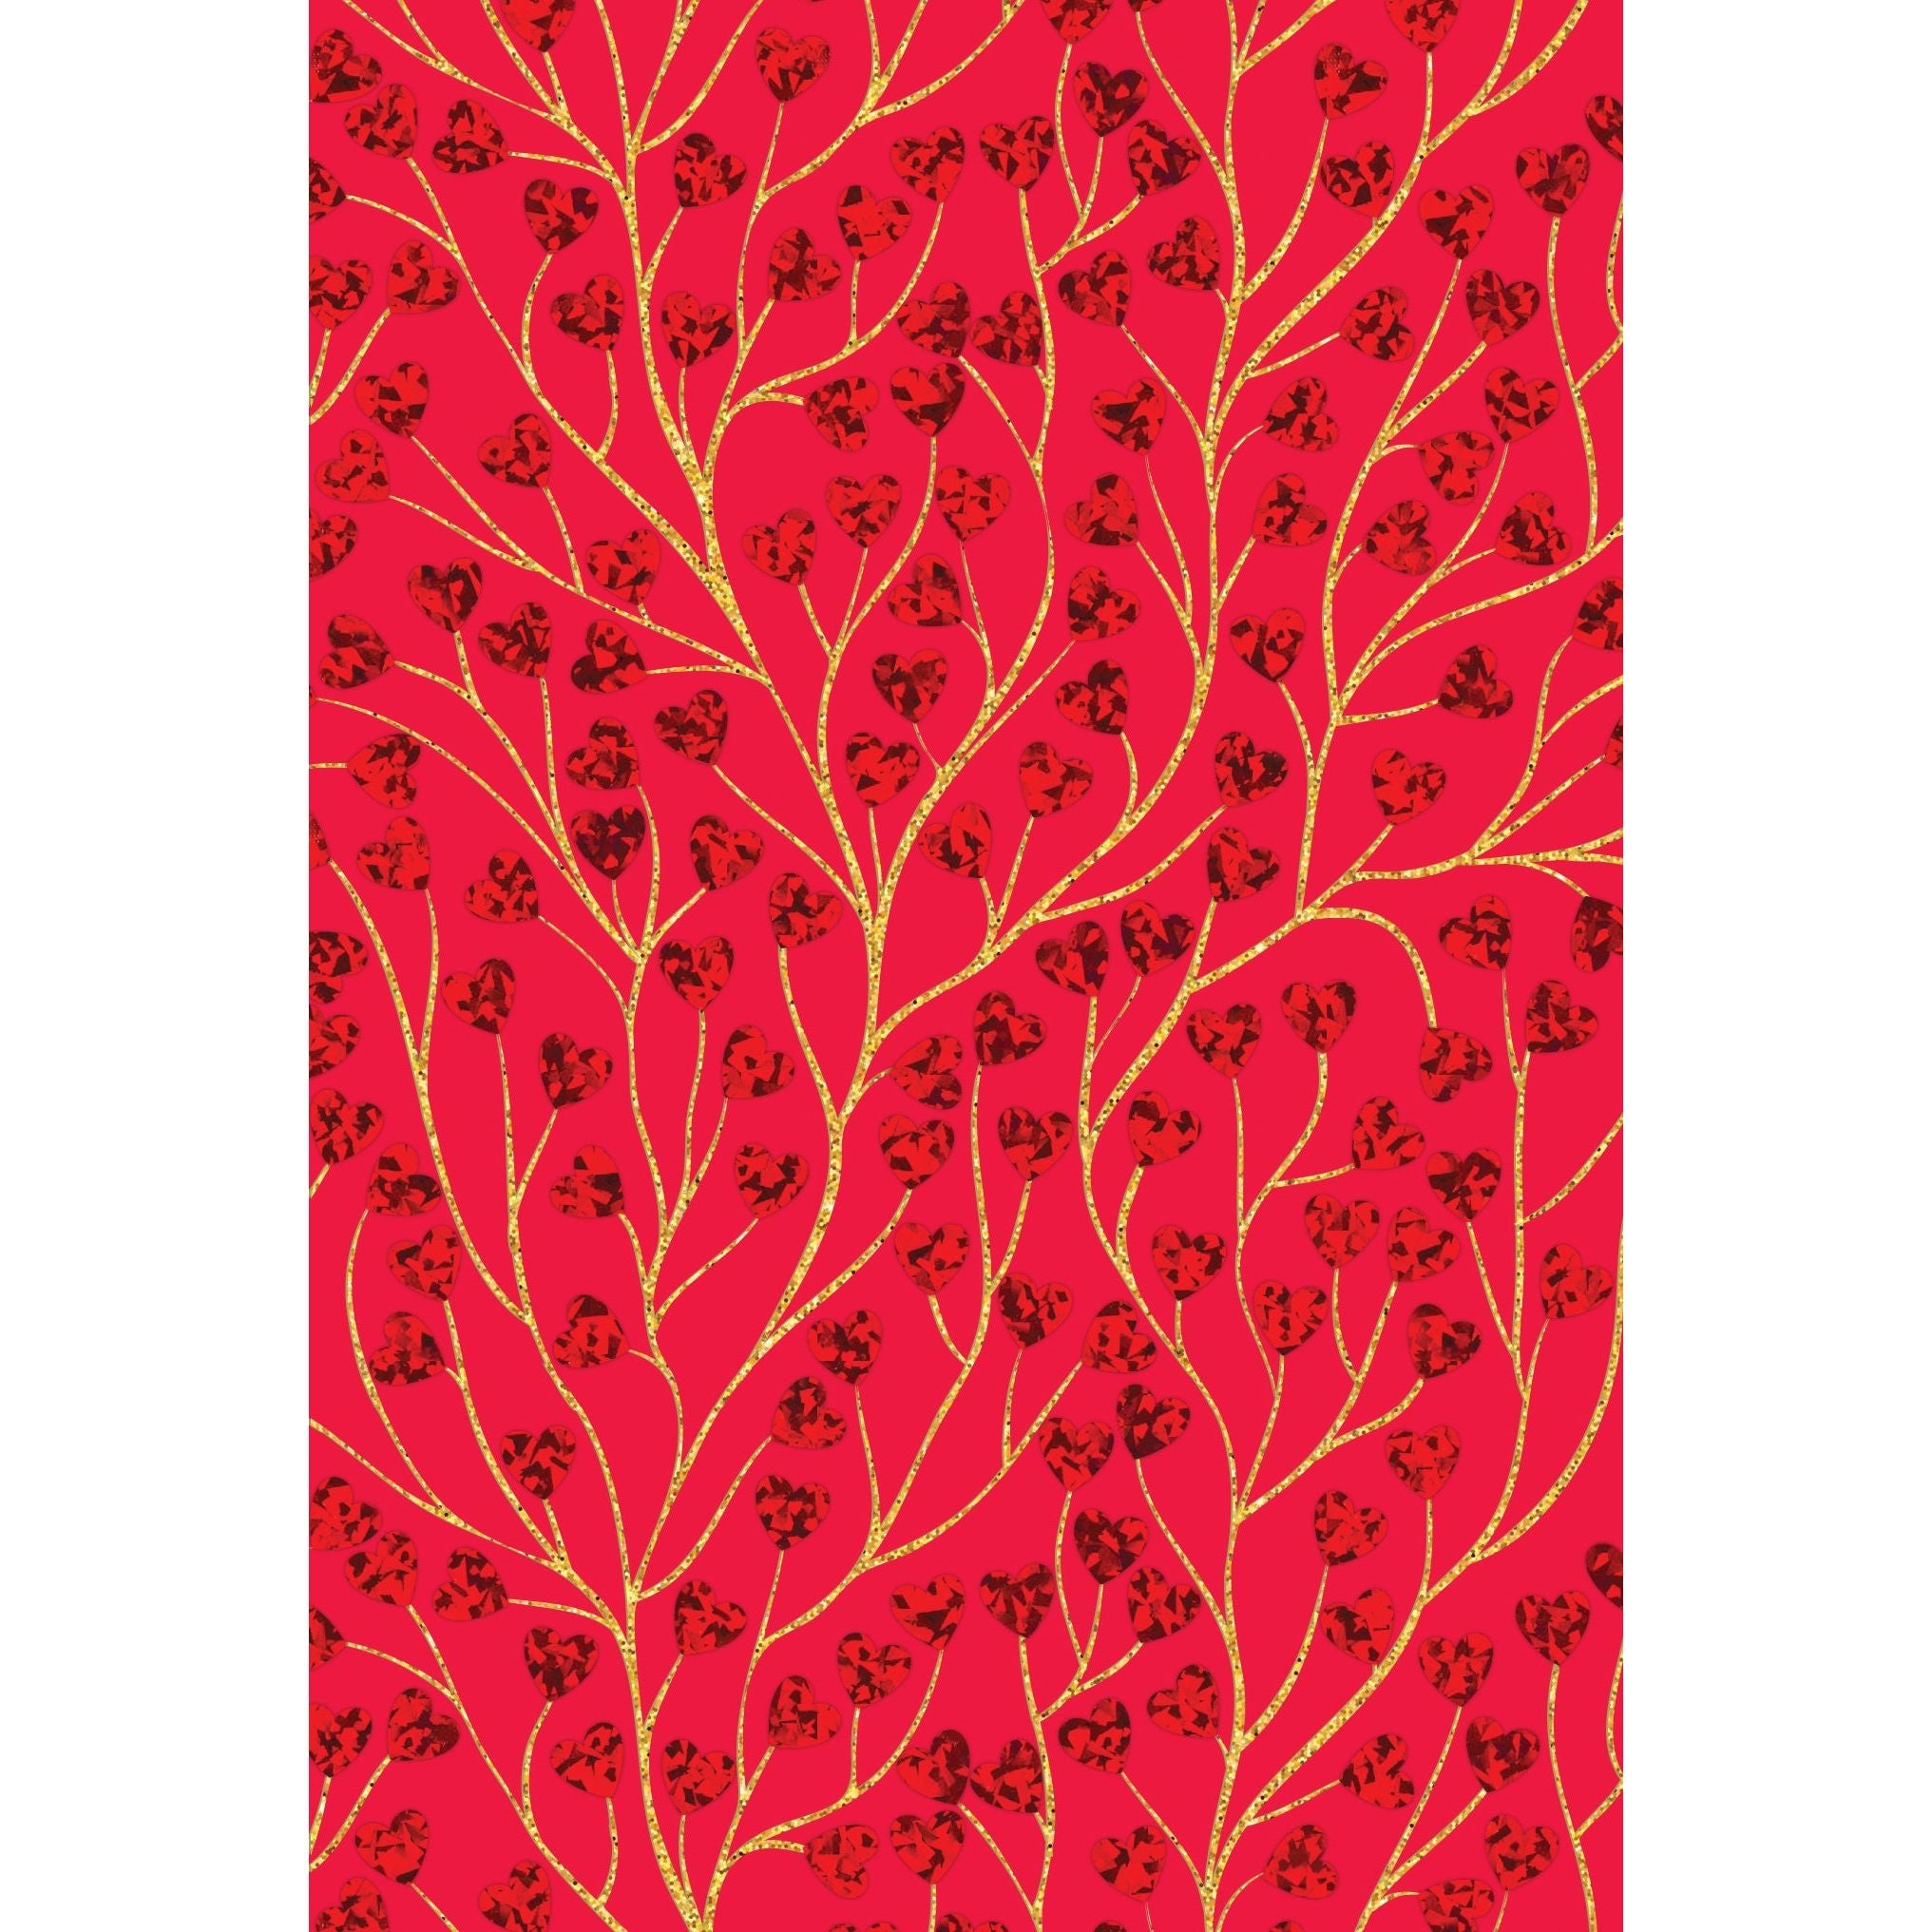 Heart Branches Valentine's Card - Cardmore